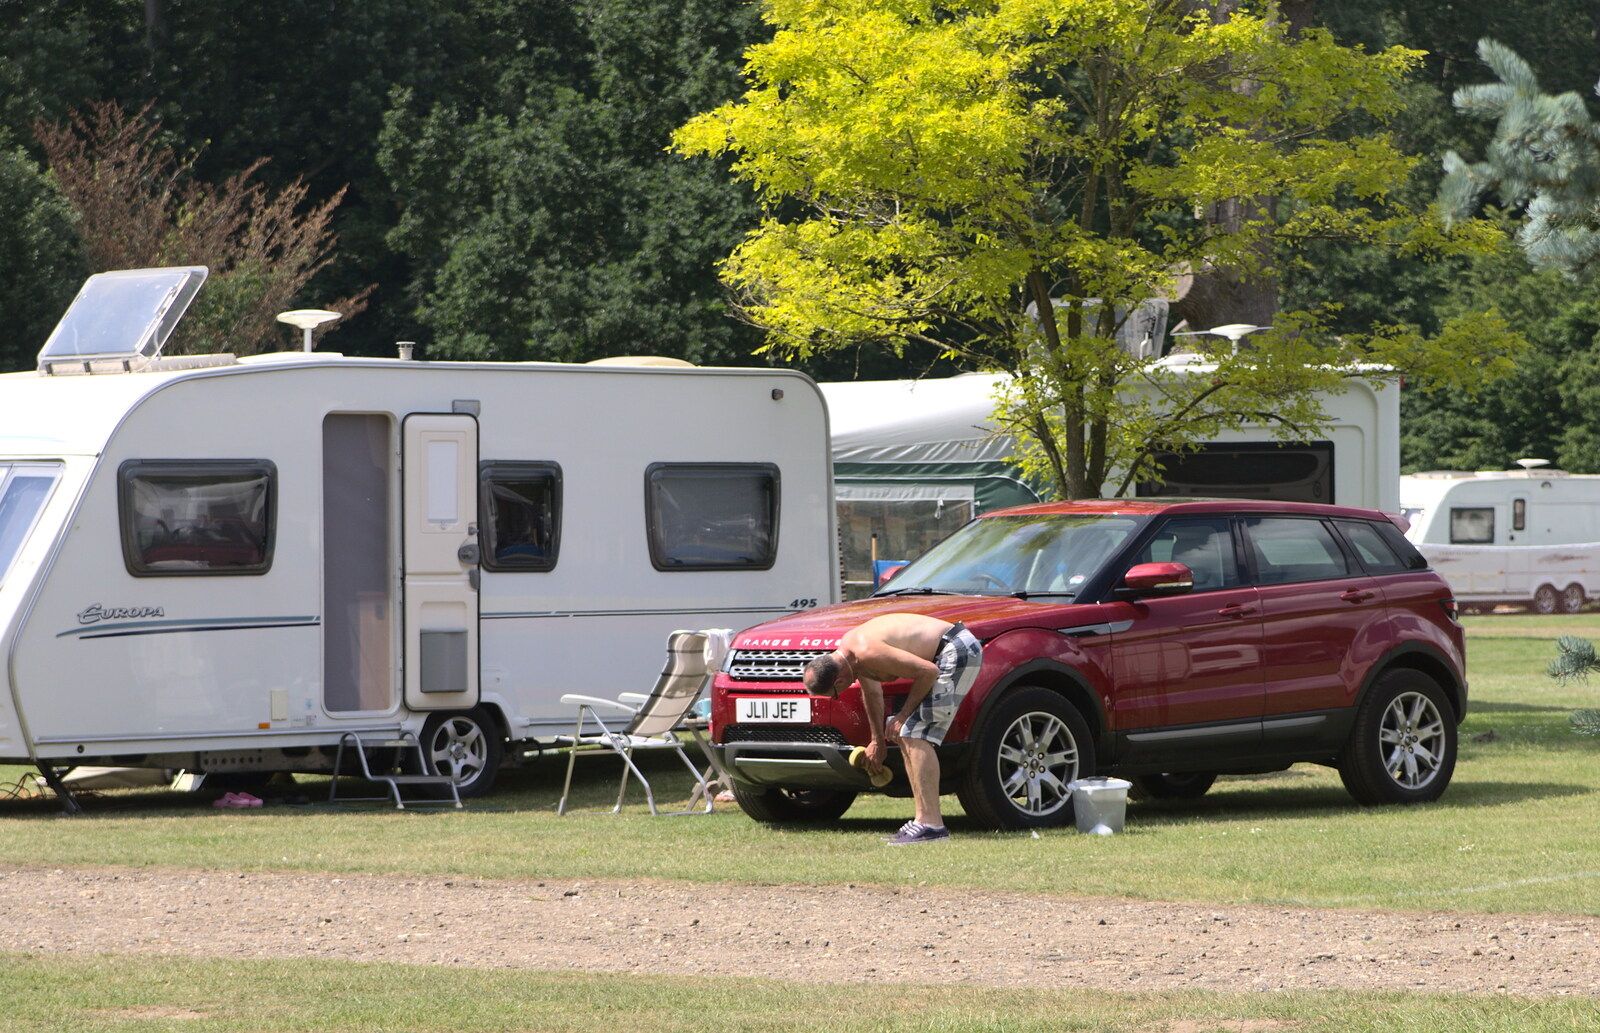 Someone actually washes their Fascistomobile from A Weekend in the Camper Van, West Harling, Norfolk - 21st June 2014